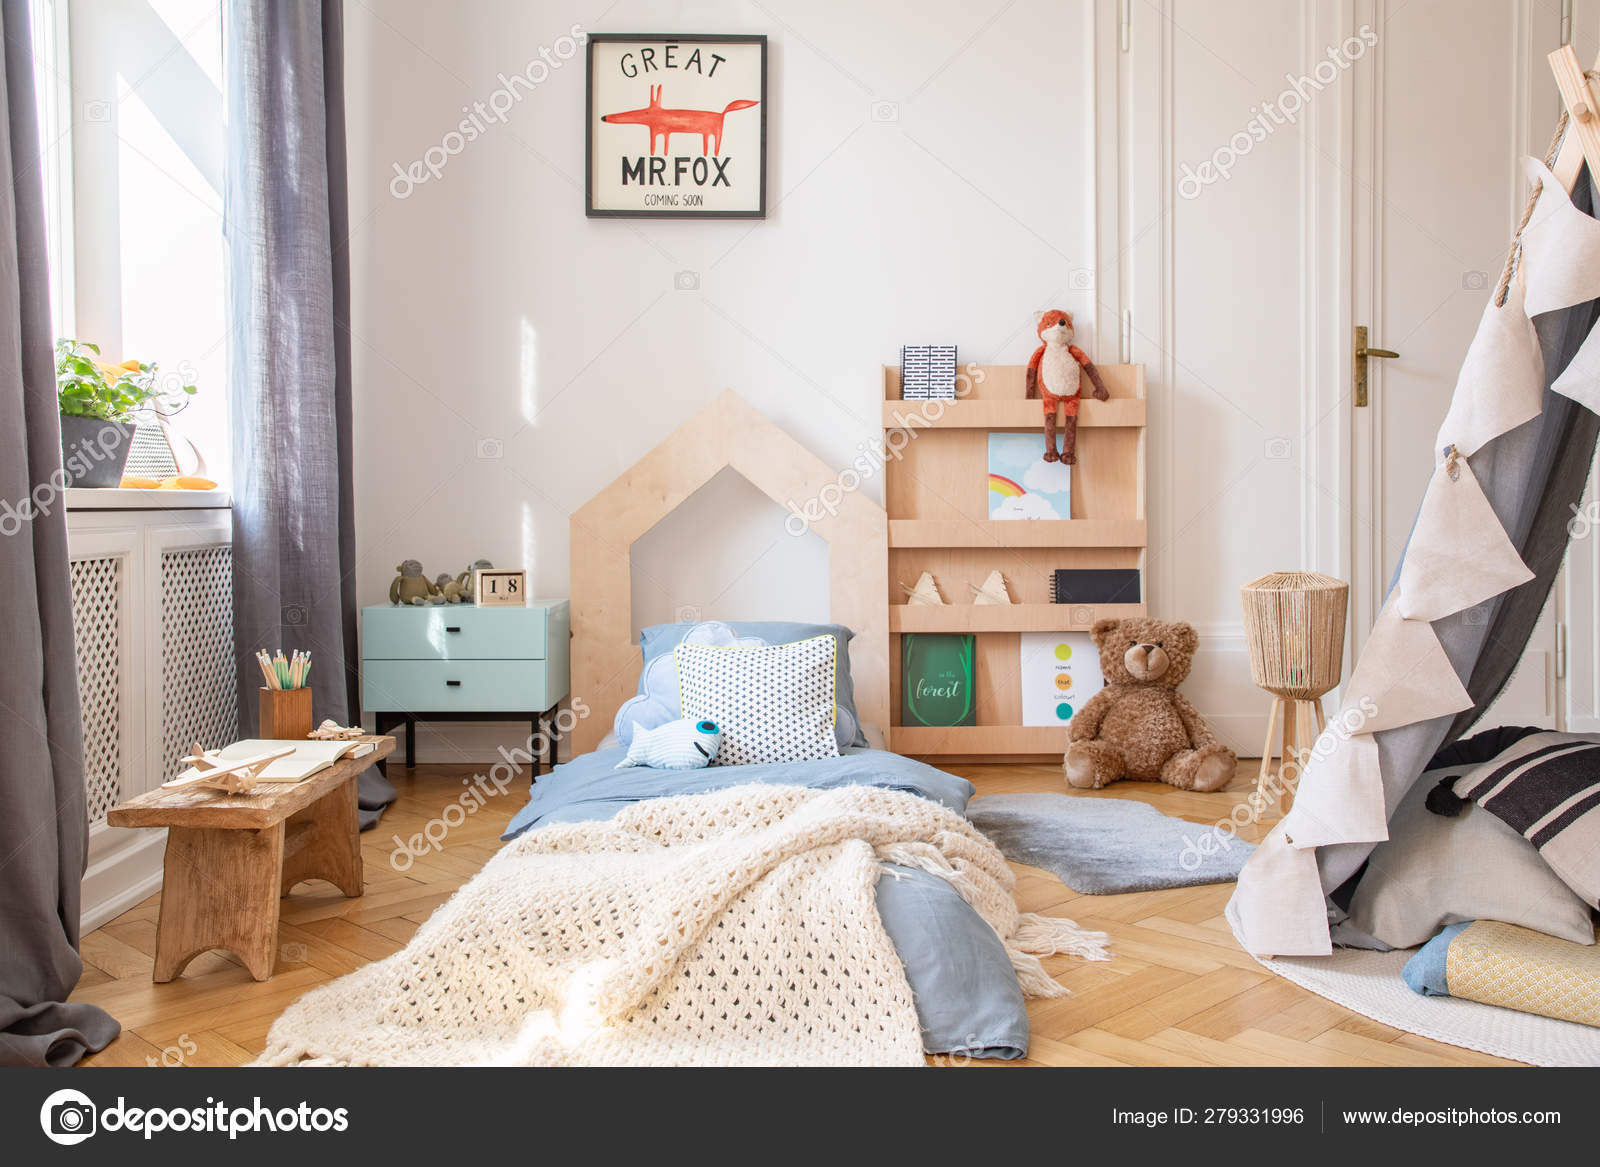 Maryanne Jones Hertellen beginsel Cozy kids bedroom with blue bedding and warm blanket on the bed, real photo  with mockup poster on the floor Stock Photo by ©photographee.eu 279331996